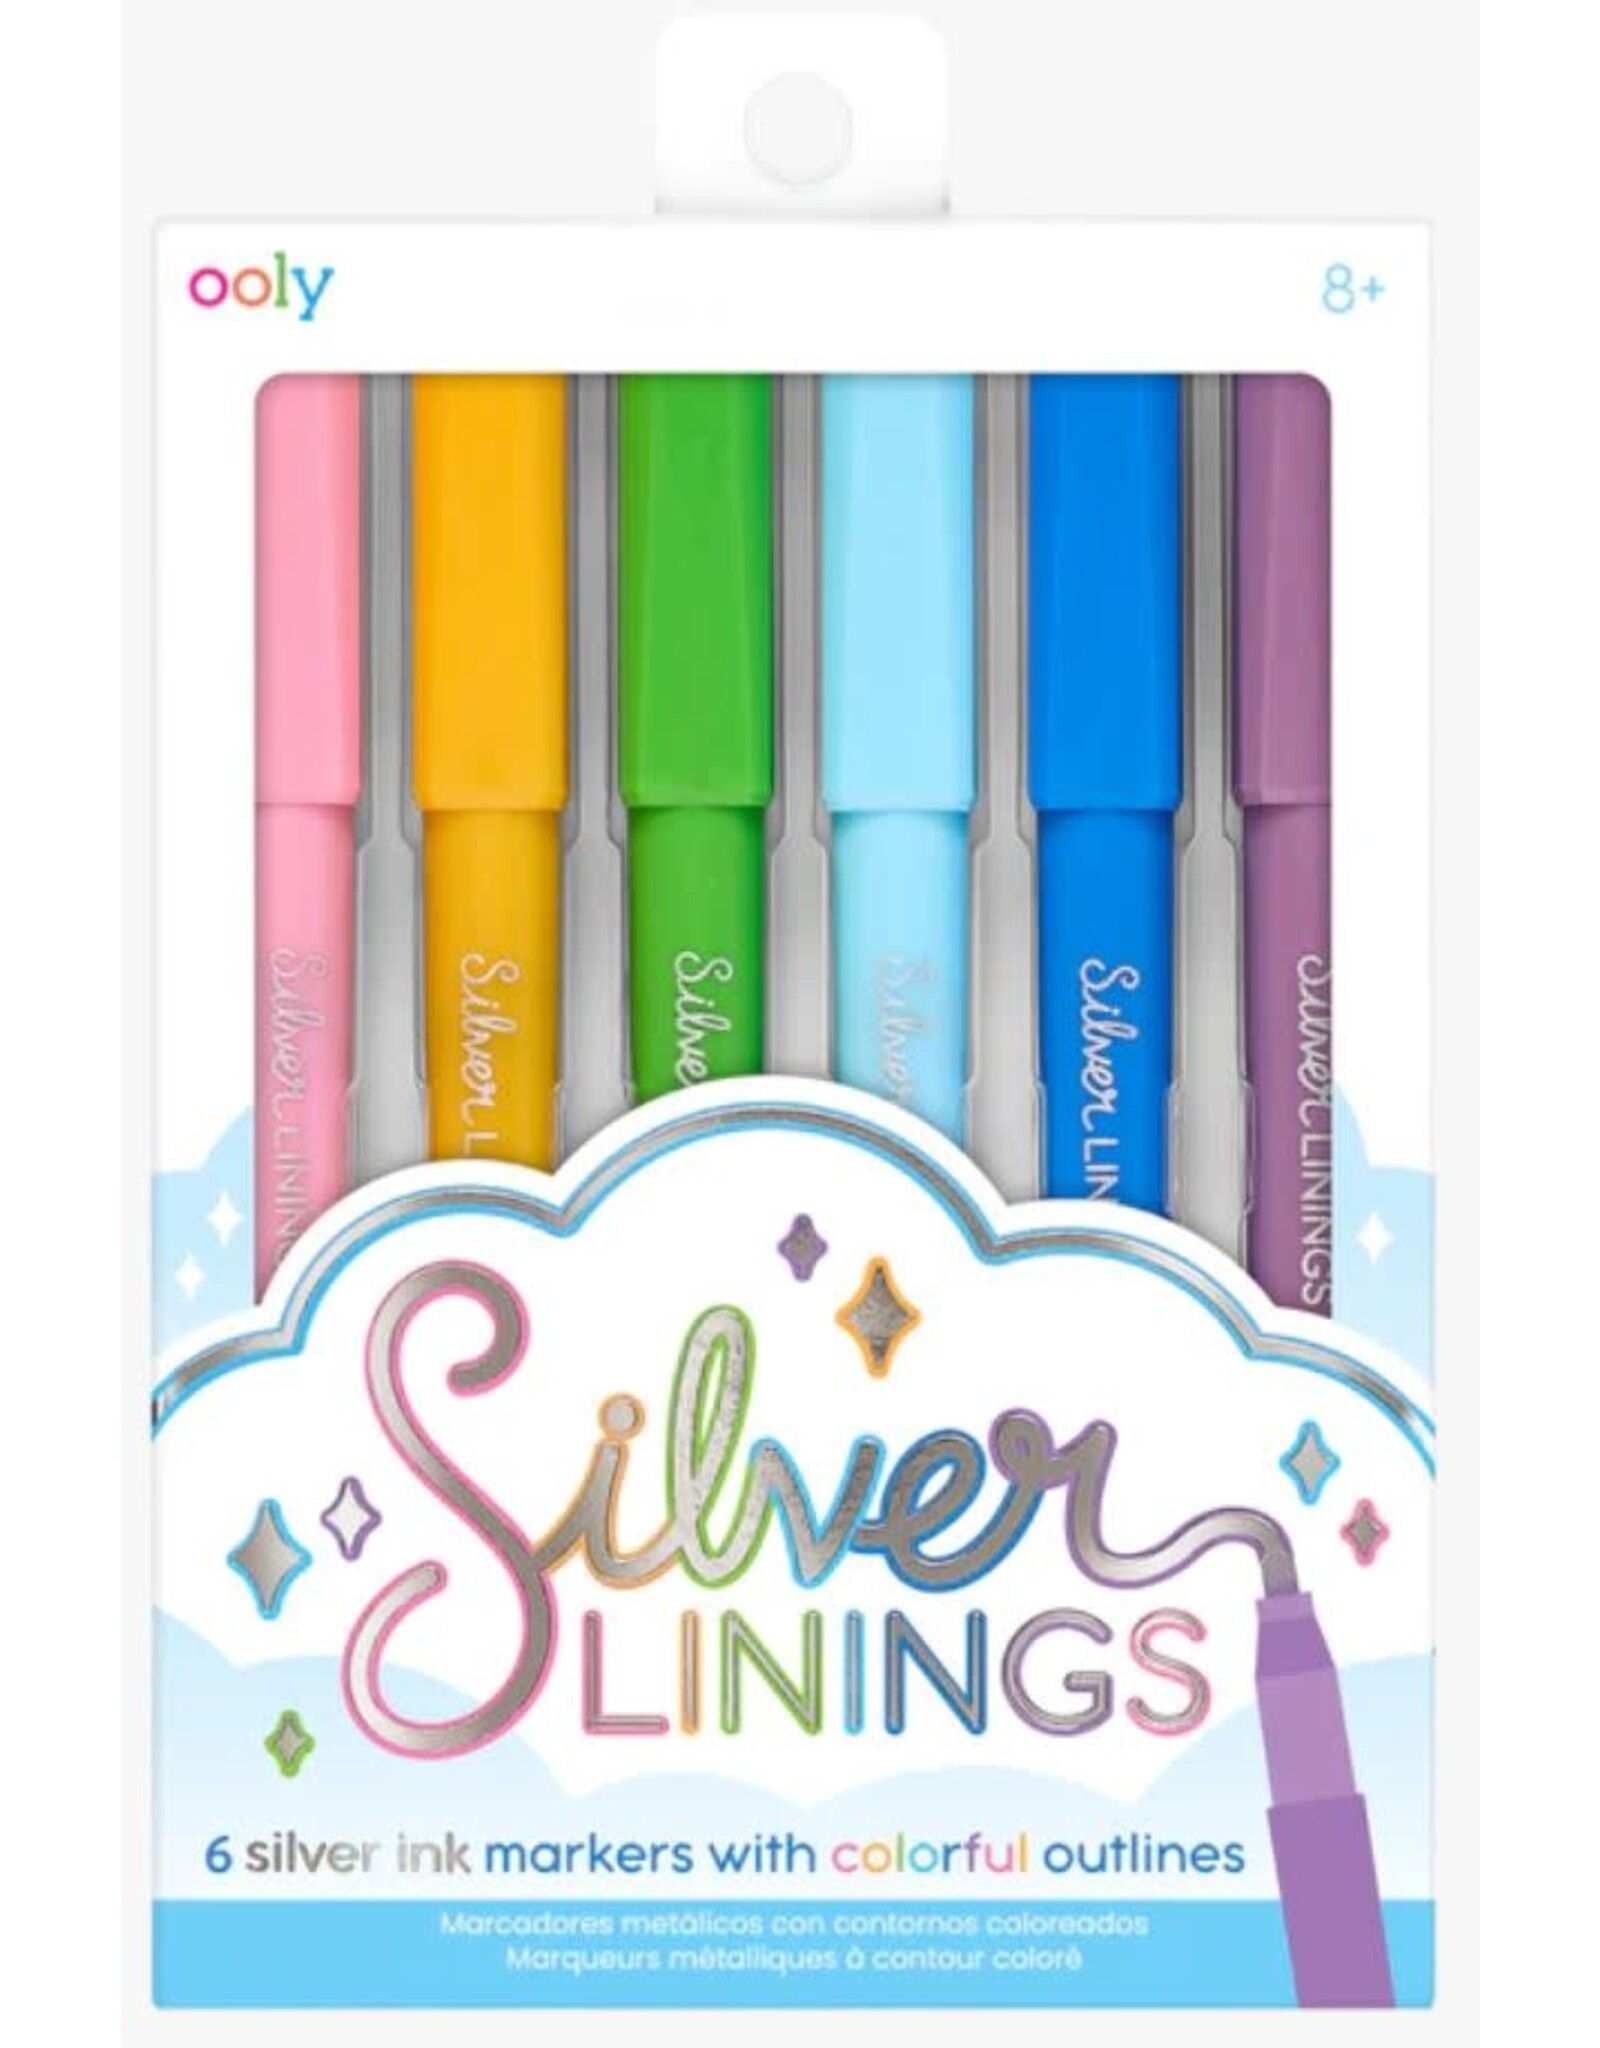 ooly Silver Linings 6 Outline Markers